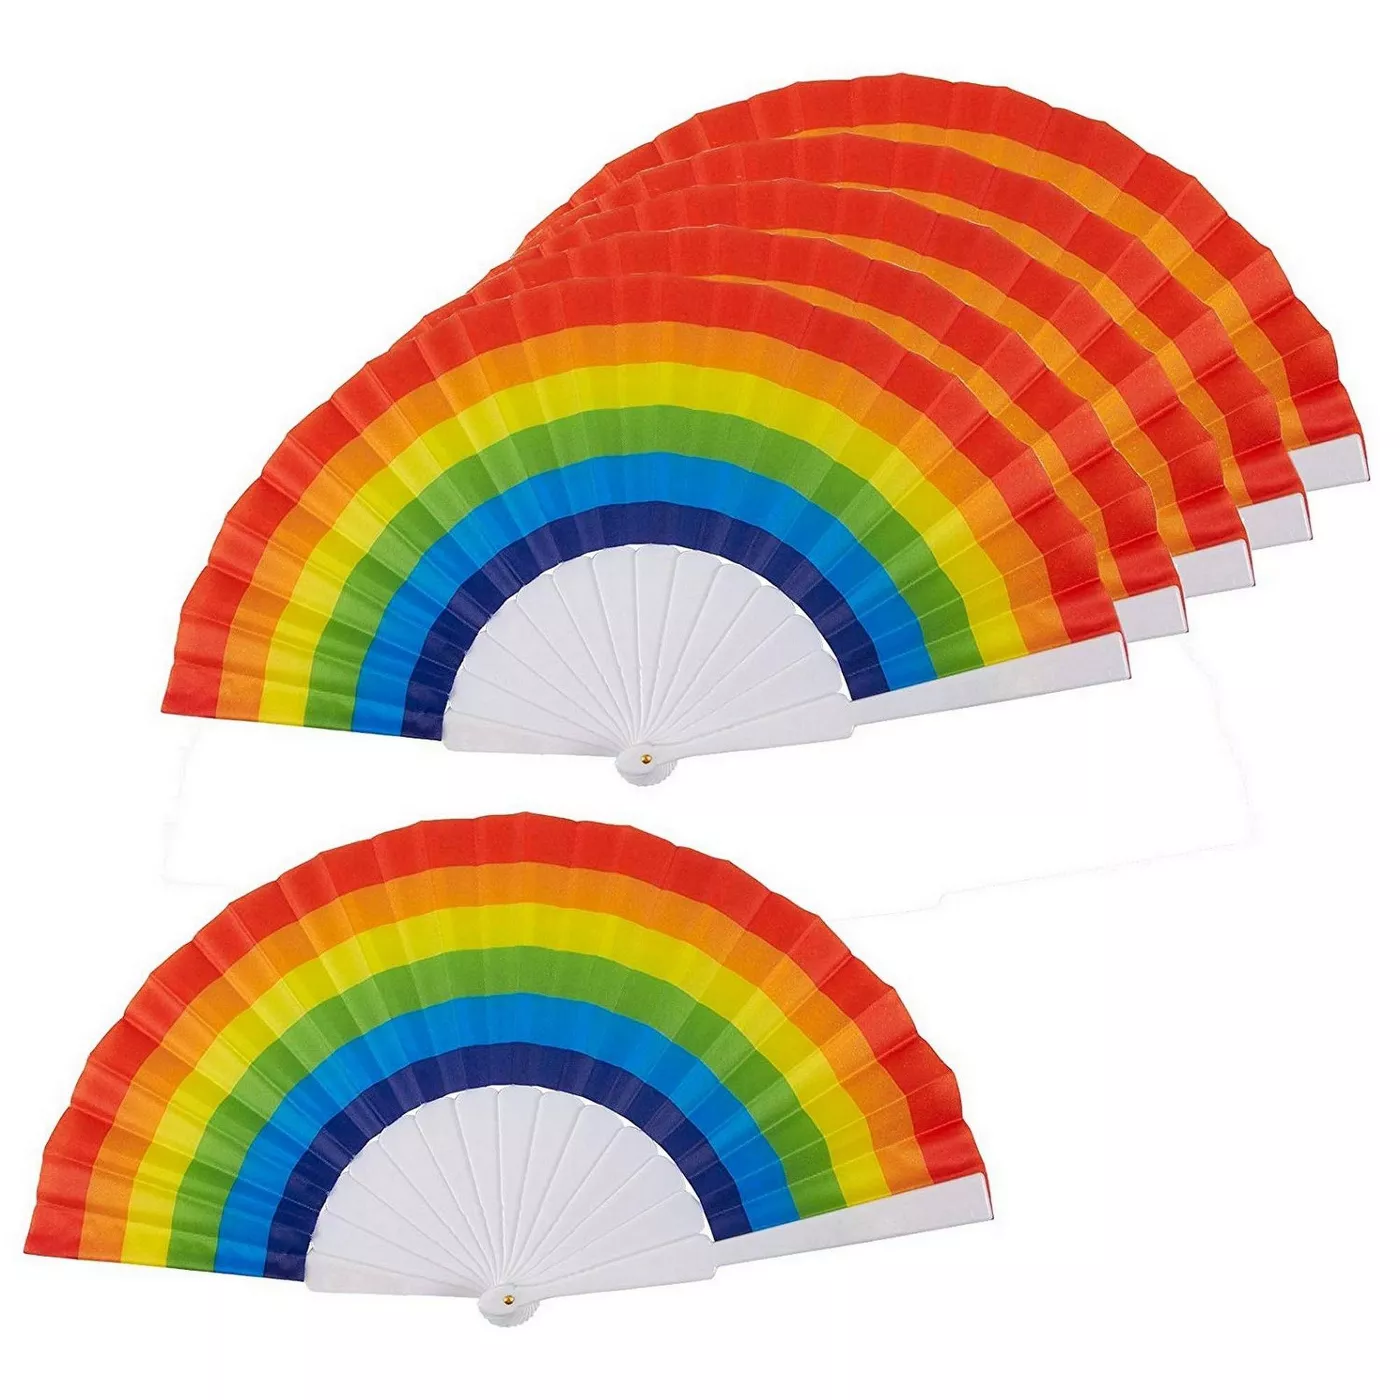 Juvale 6 Pack Folding Fan for Pride Parades, Rainbow Paper fans, LGBTQ accessories, 9 In - image 1 of 7